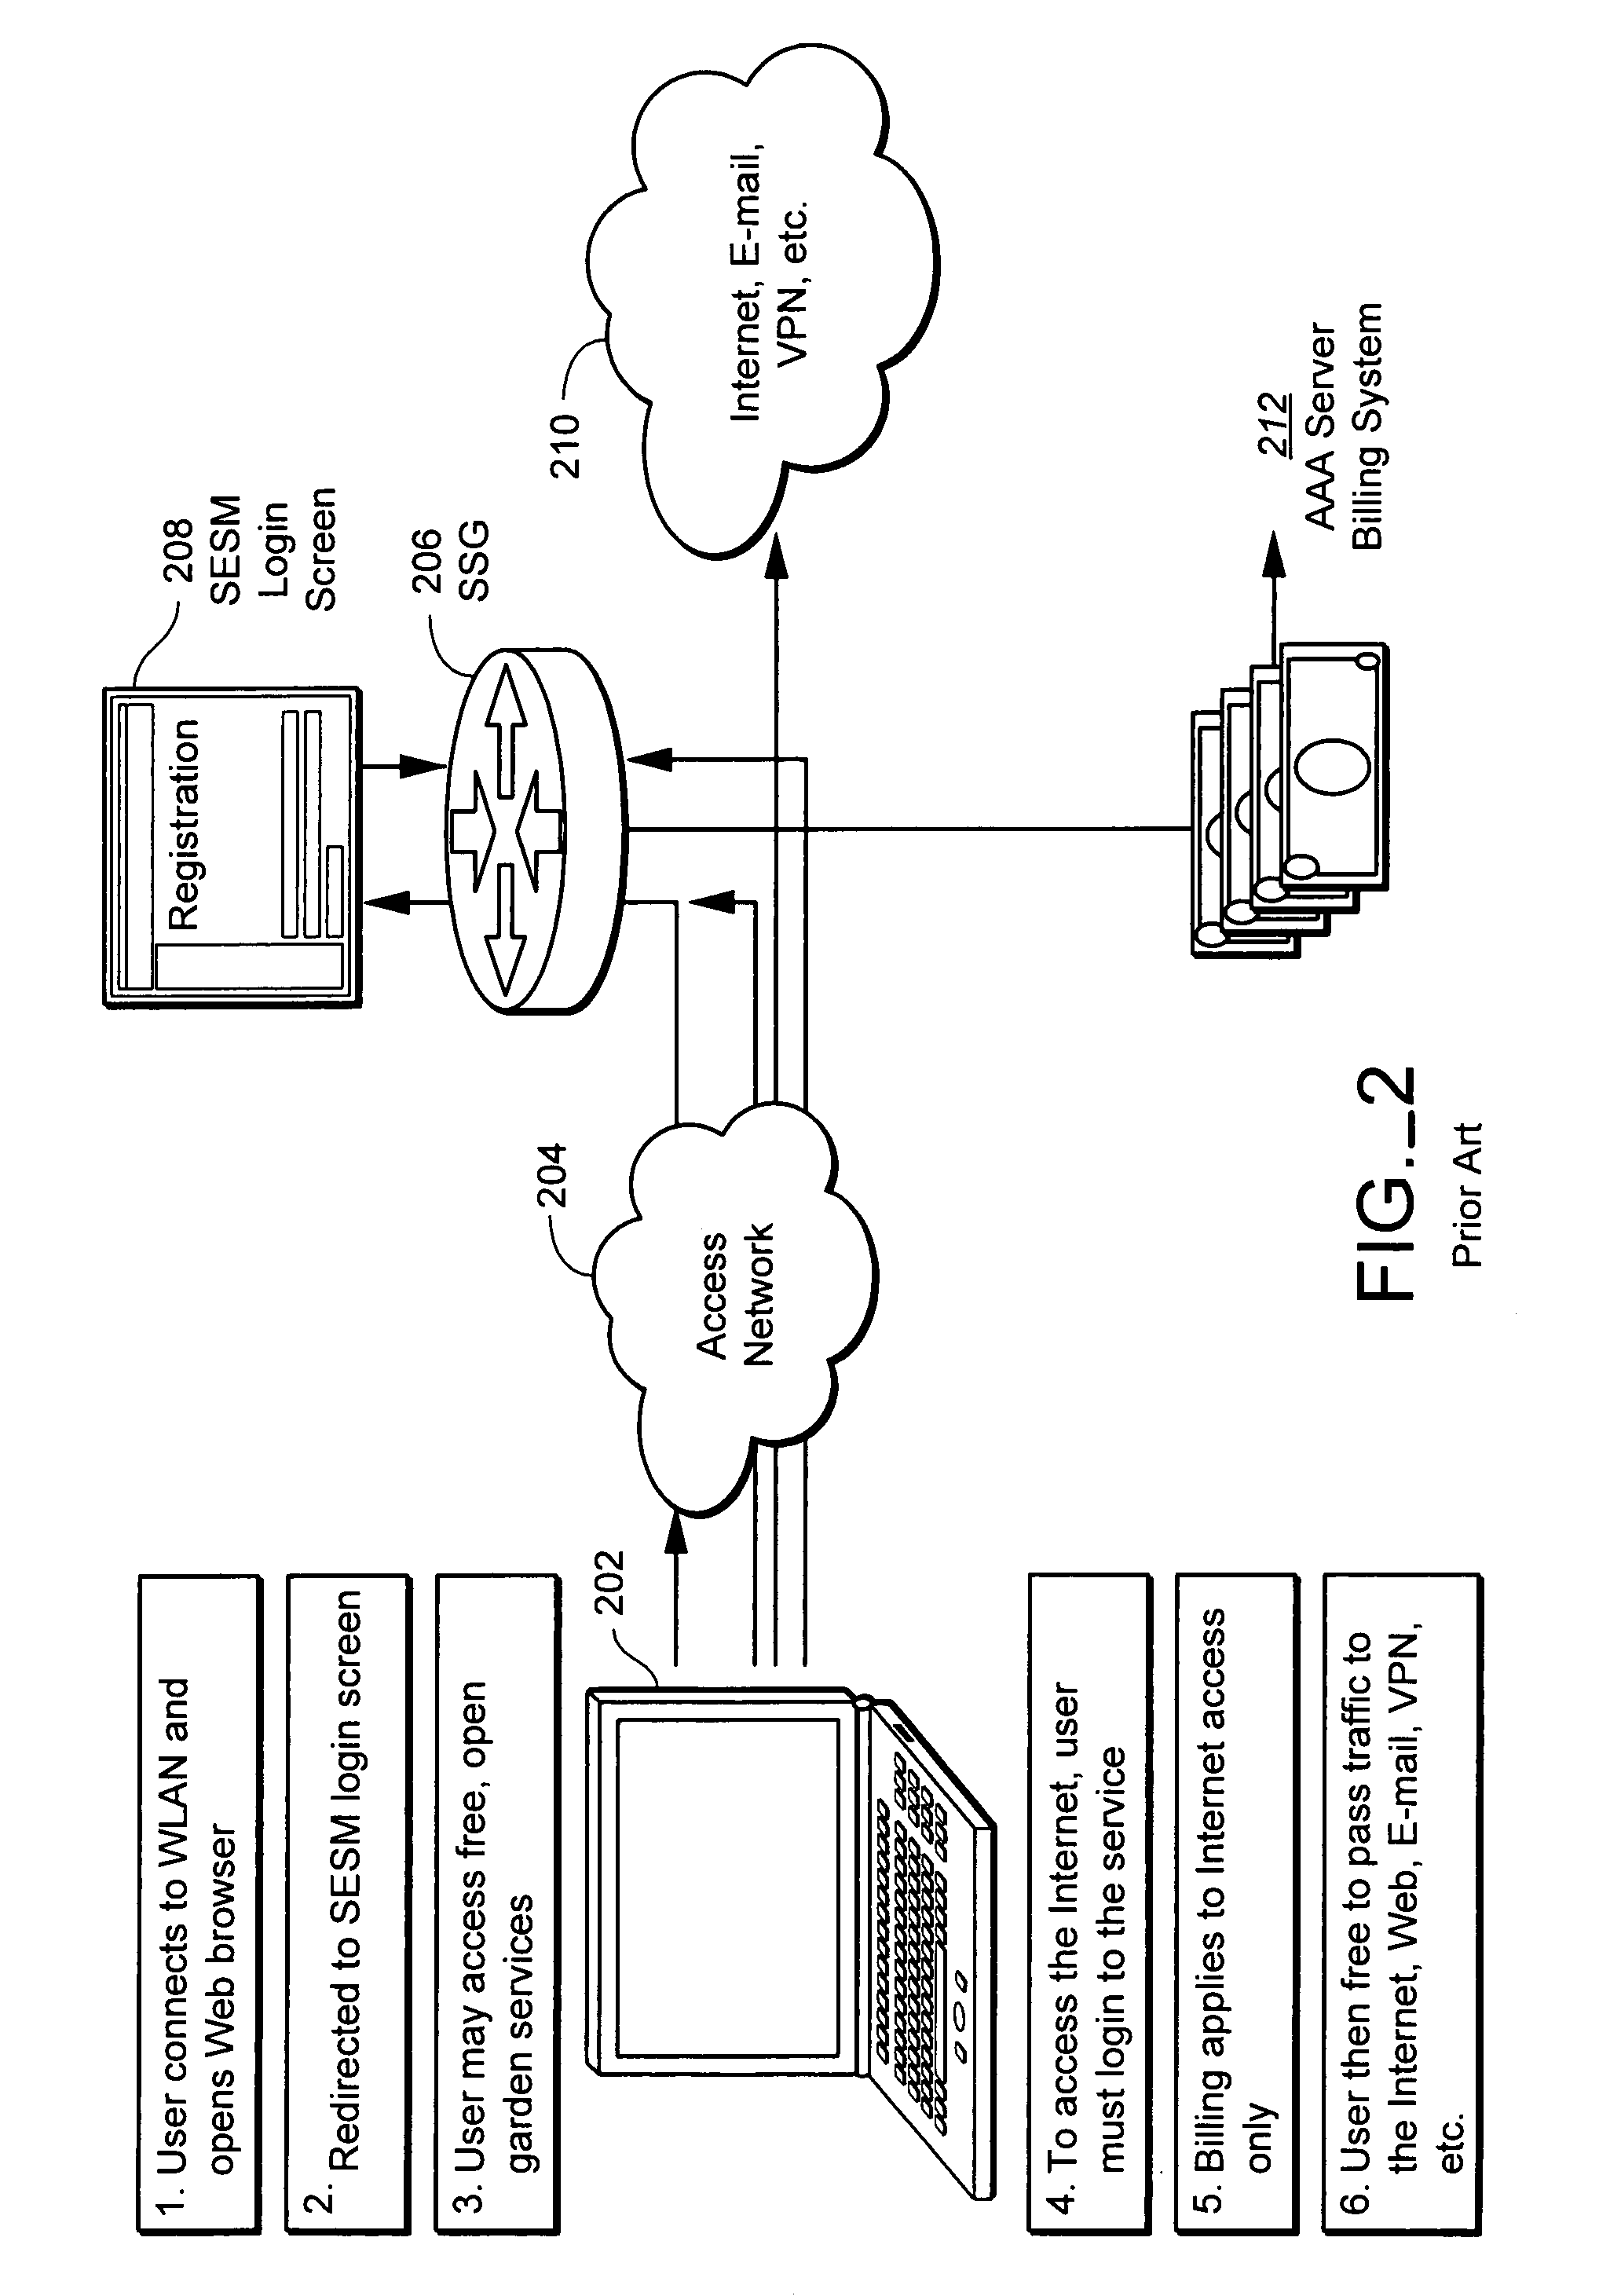 Methods and apparatus for performing layer 2 authentication and service selection in SSG based networks